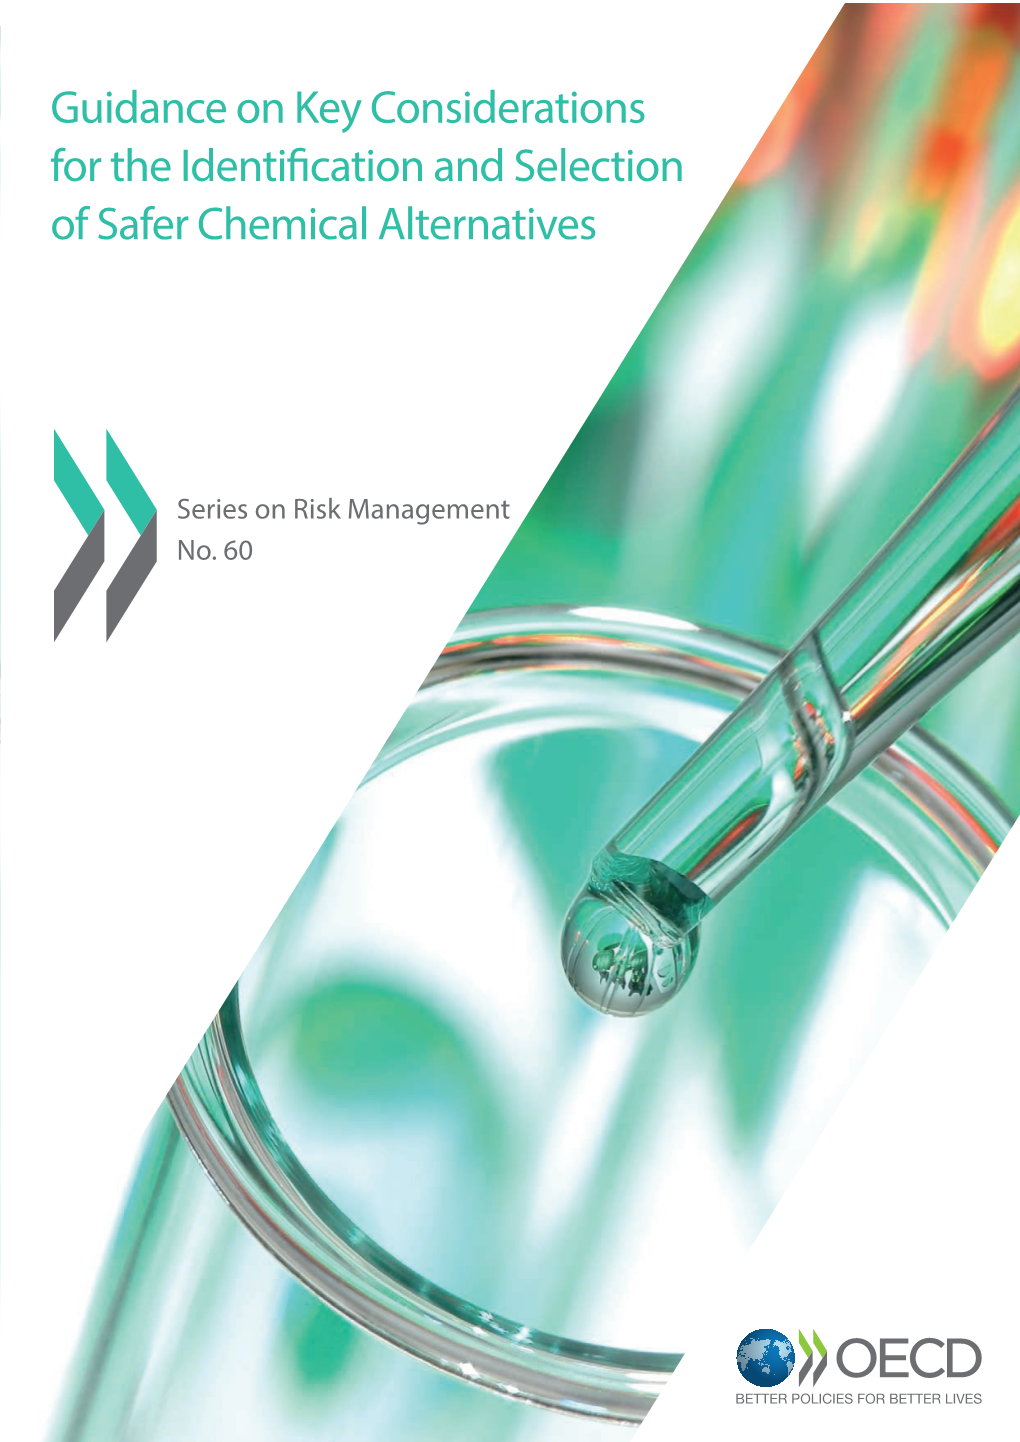 Guidance on Key Considerations for the Identification and Selection of Safer Chemical Alternatives